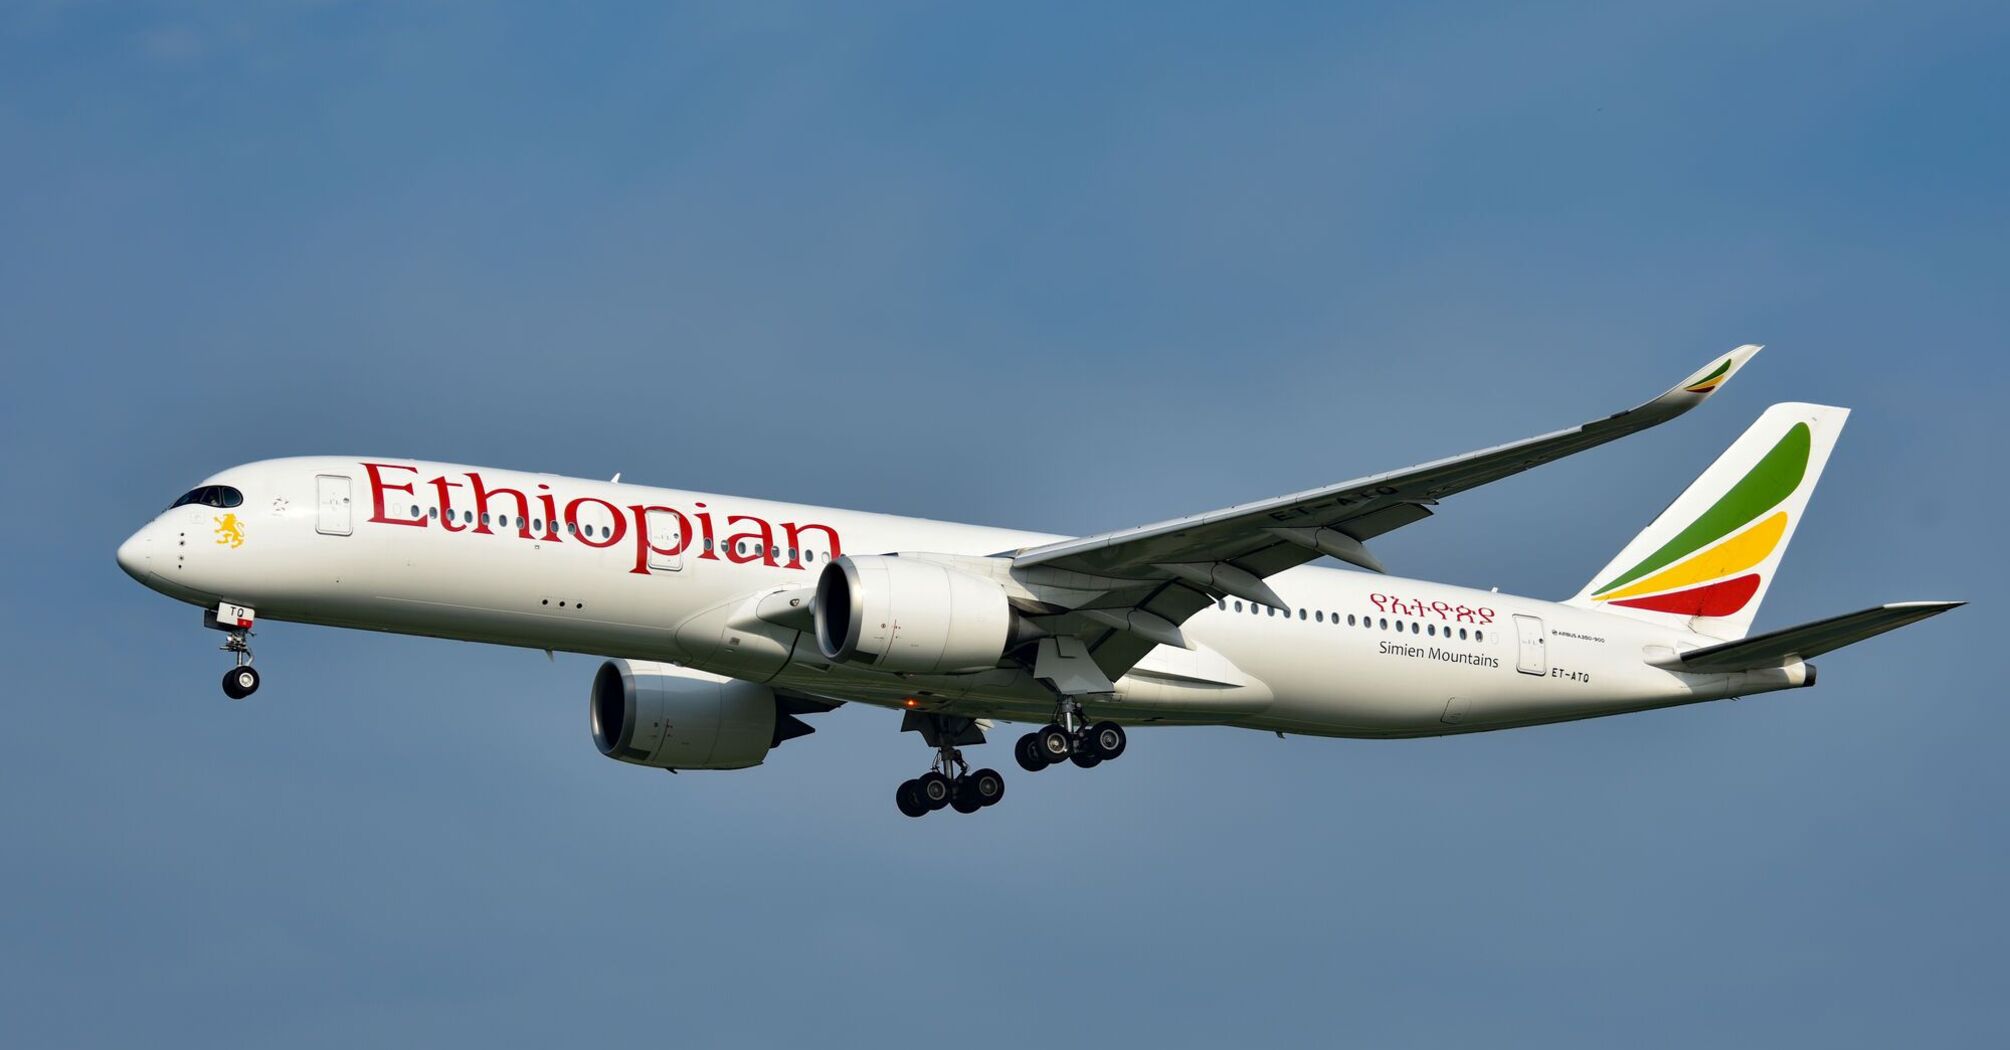 Ethiopian Airlines Compensation for Delayed or Cancelled Flights